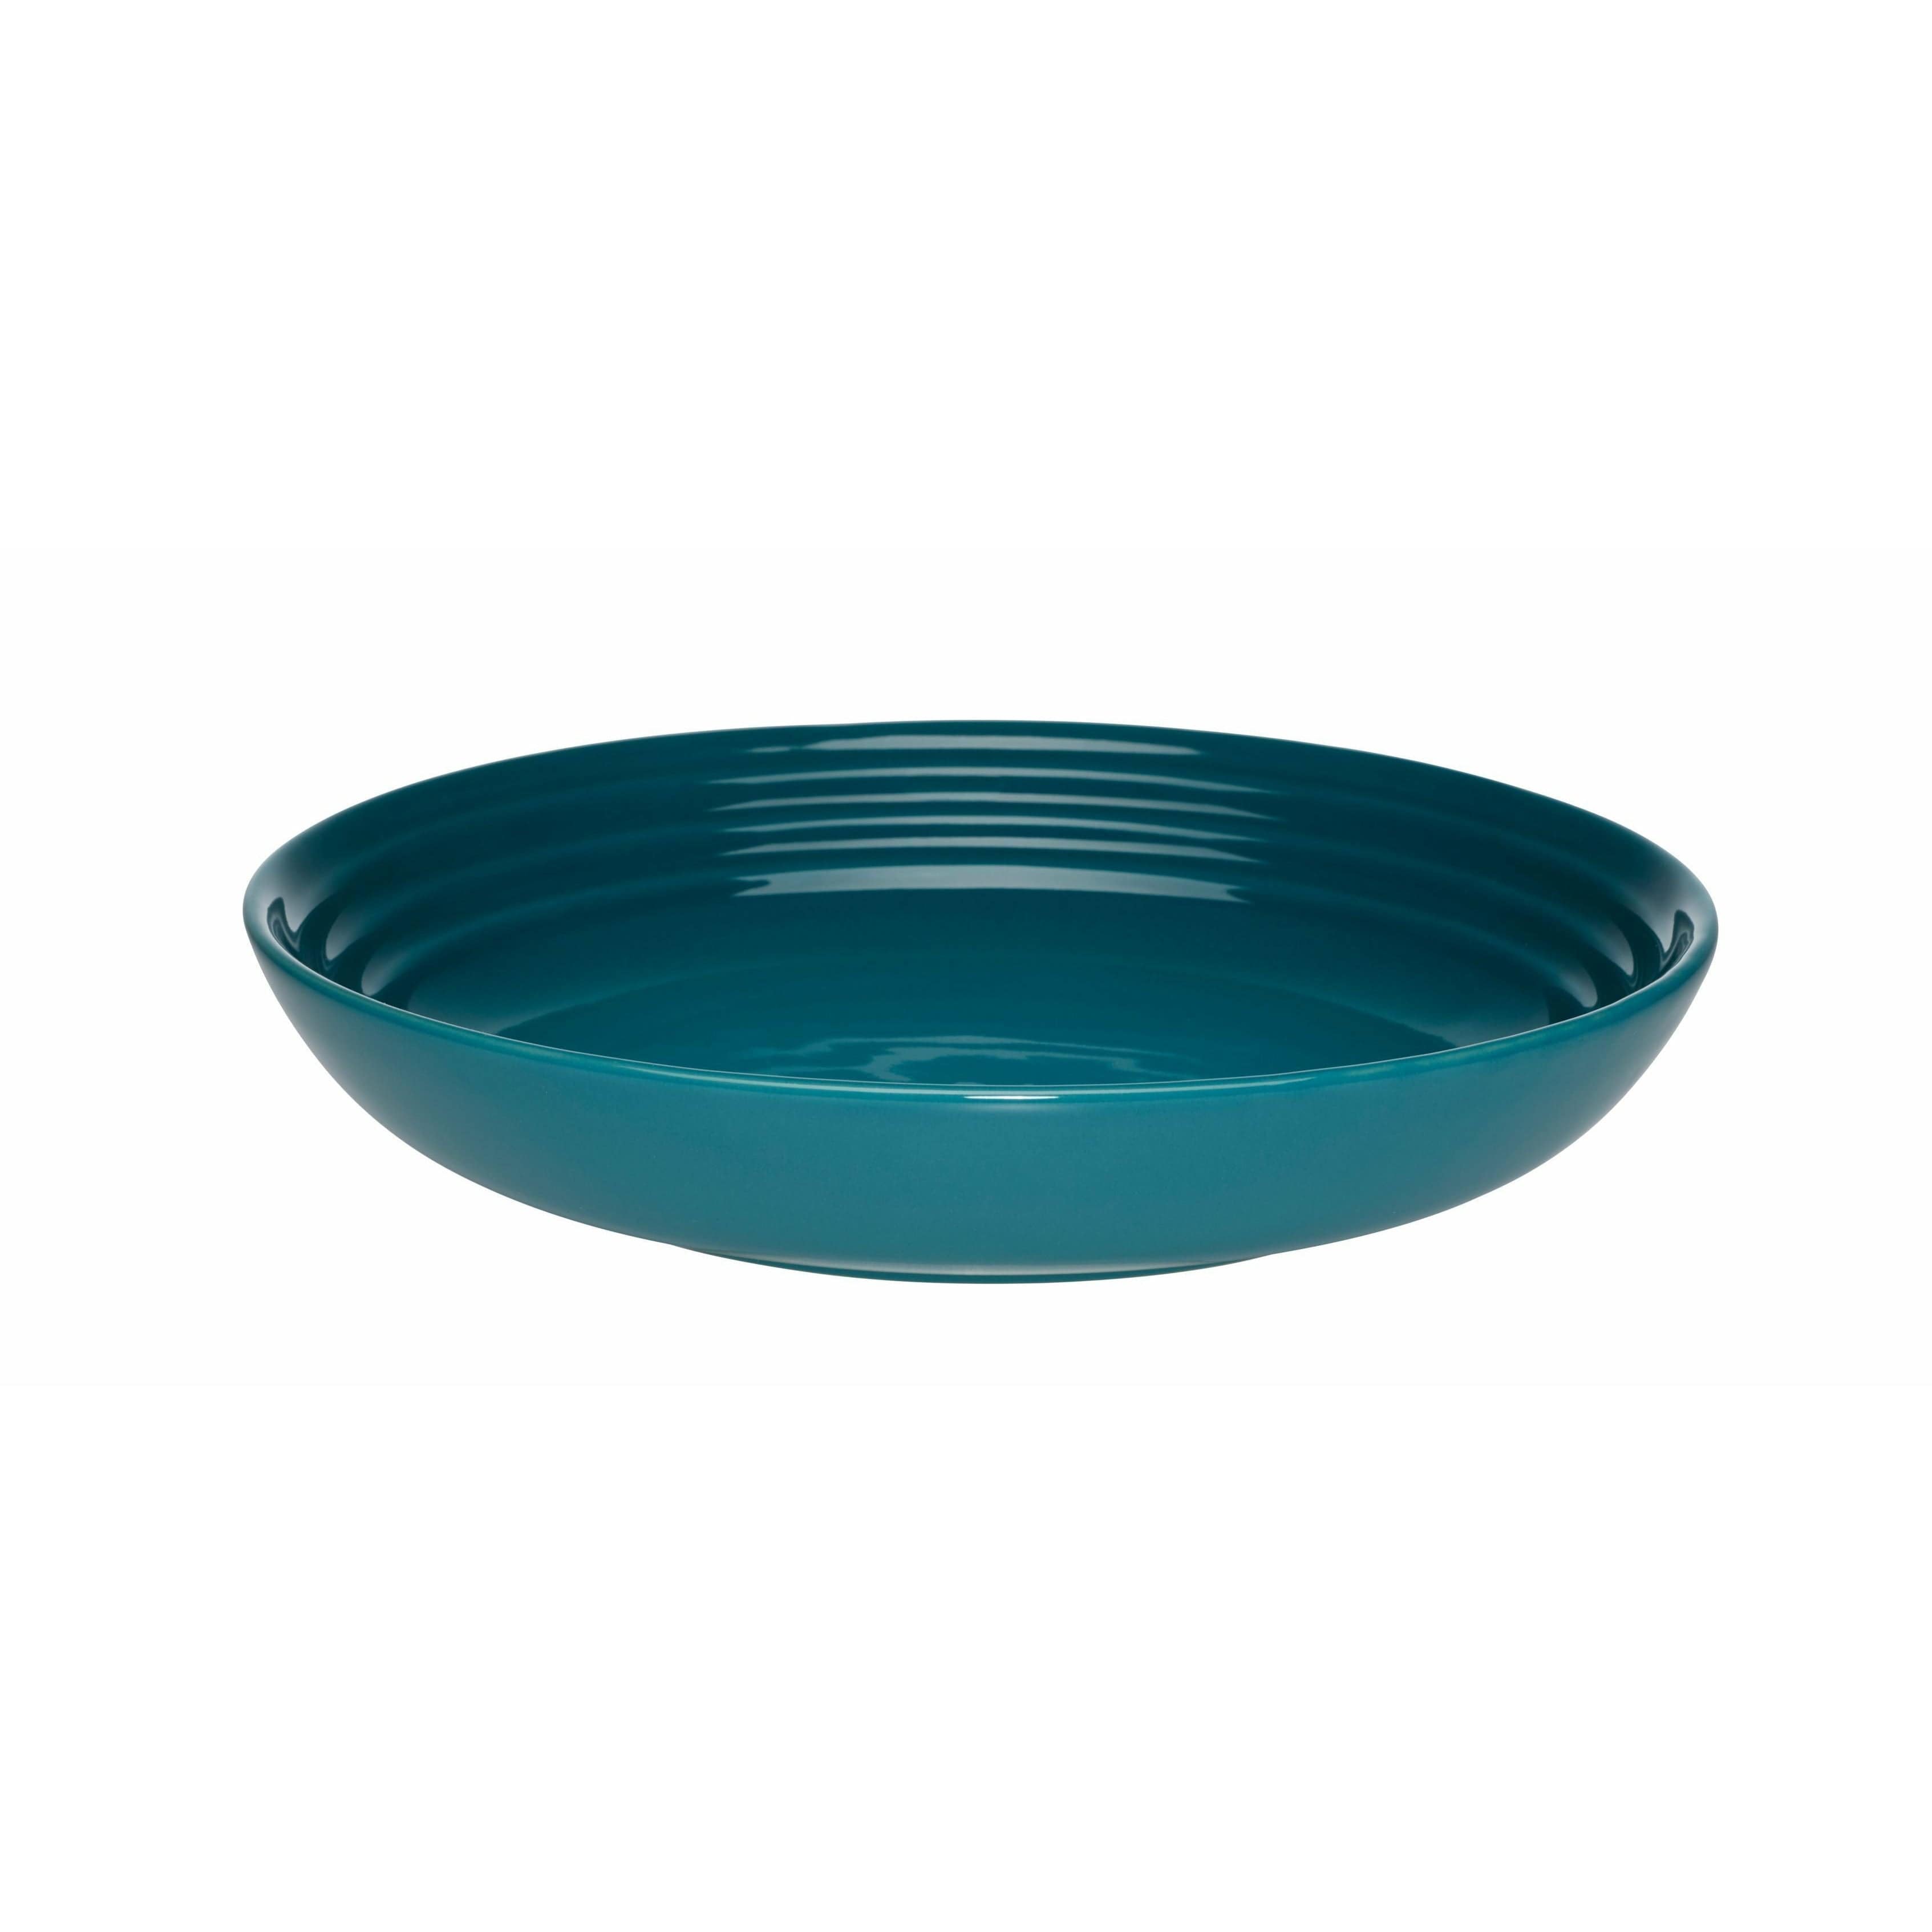 Le Creuset Signatur suppeplade 22 cm, dyb teal